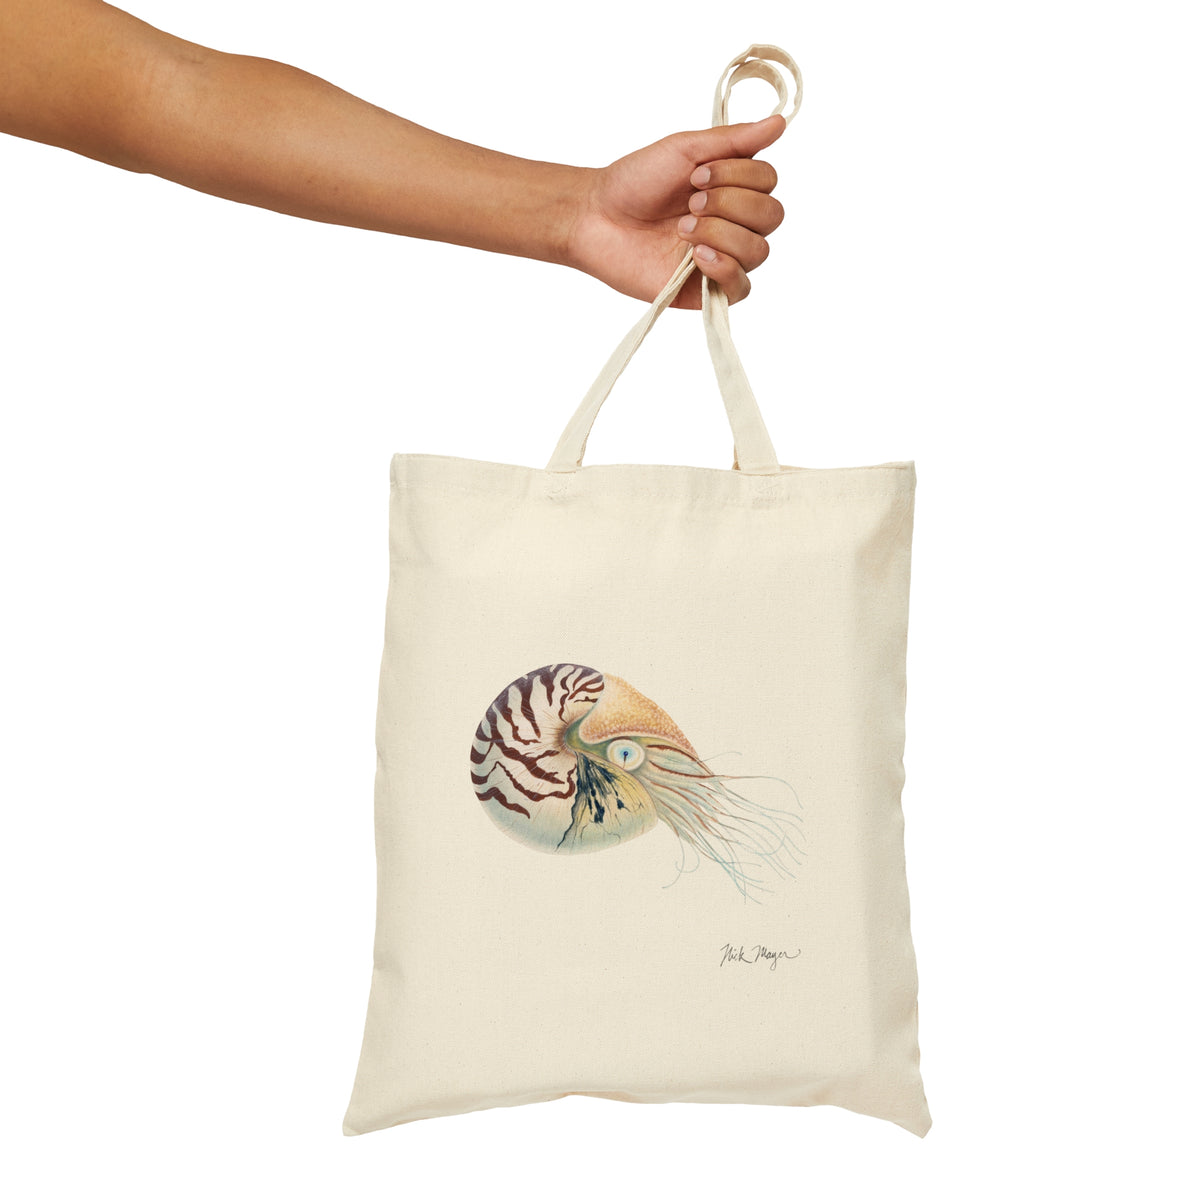 Chambered Nautilus Cotton Canvas Tote Bag